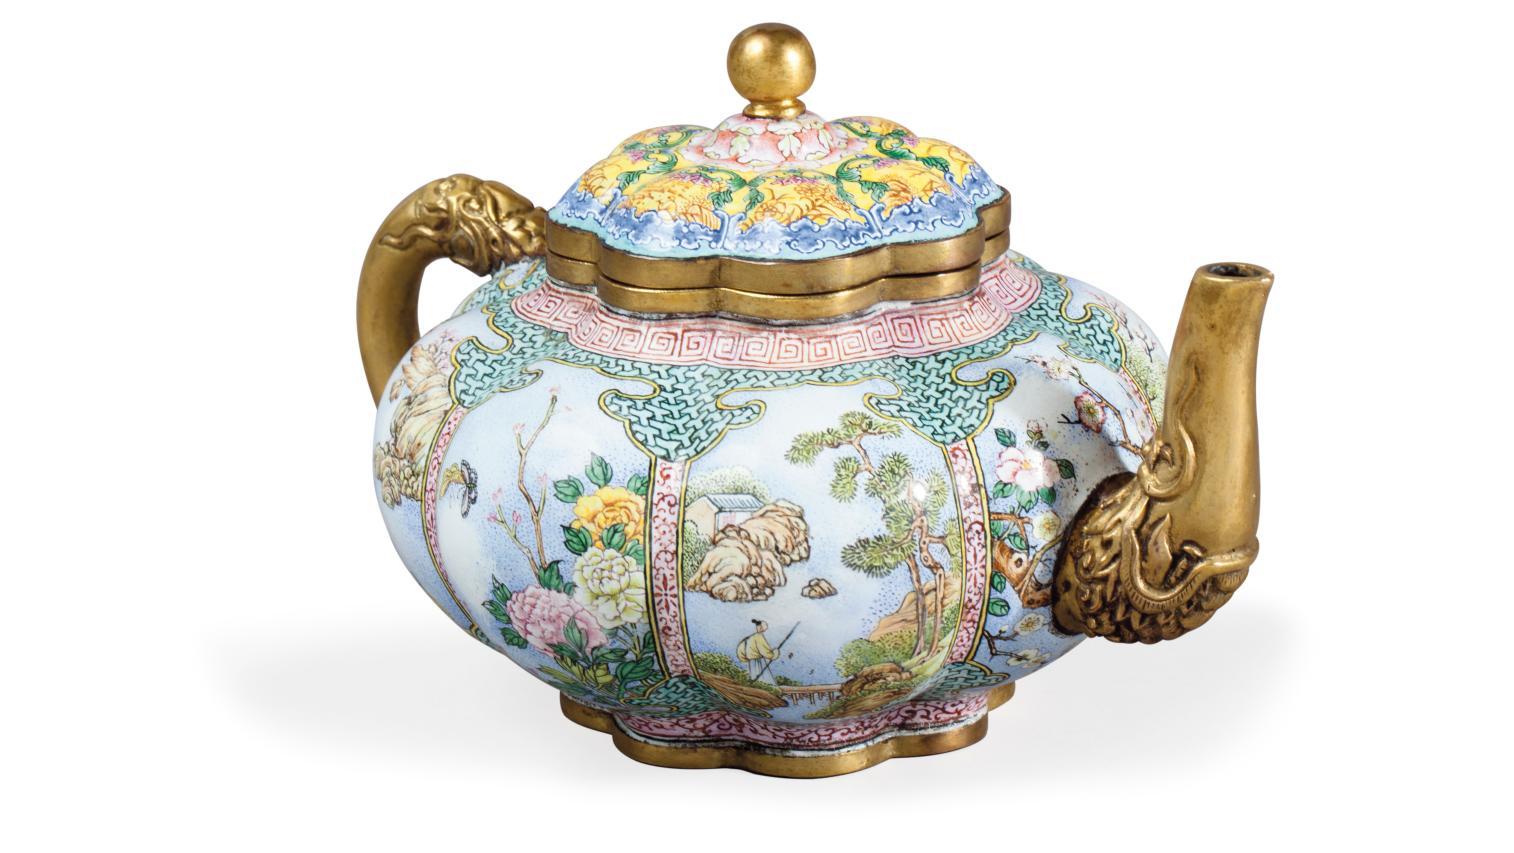 China, 18th century, small teapot in multifoil form with "falangcai" enamel decoration... A Many-faceted Asia